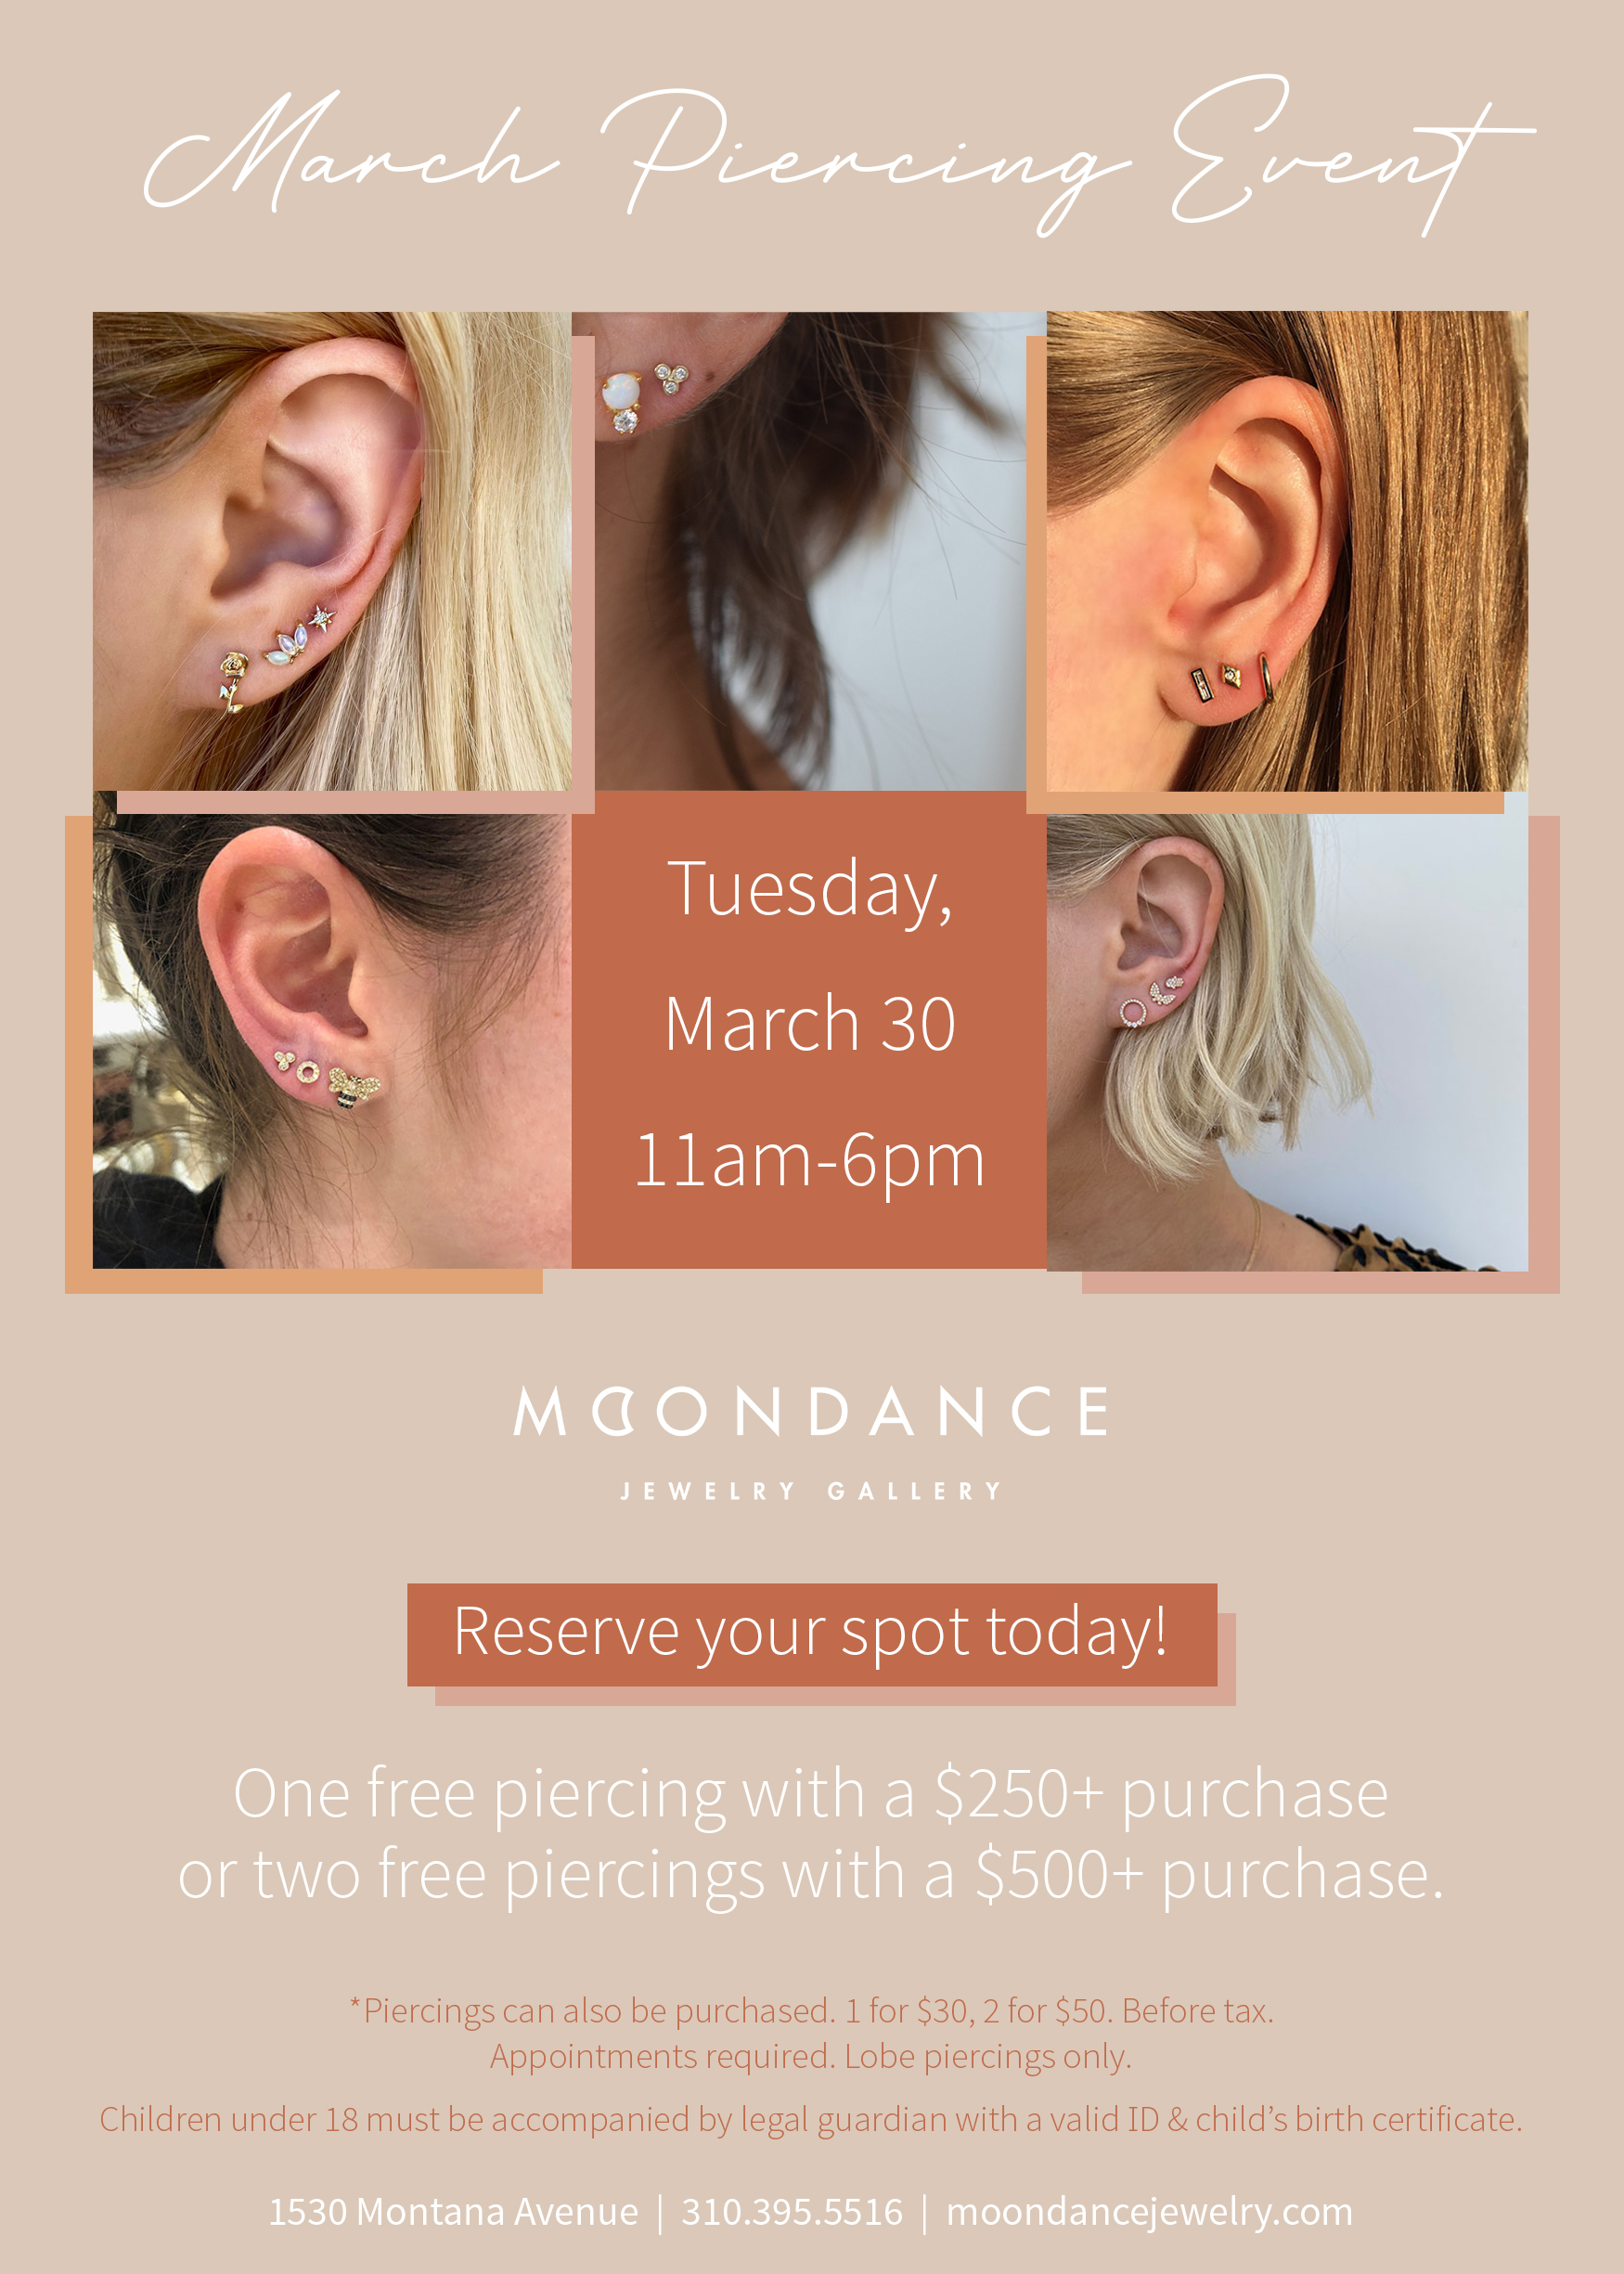 Tuesday, March 30, 2021 Piercing Event at Moondance Jewelry Gallery in Santa Monica, CA